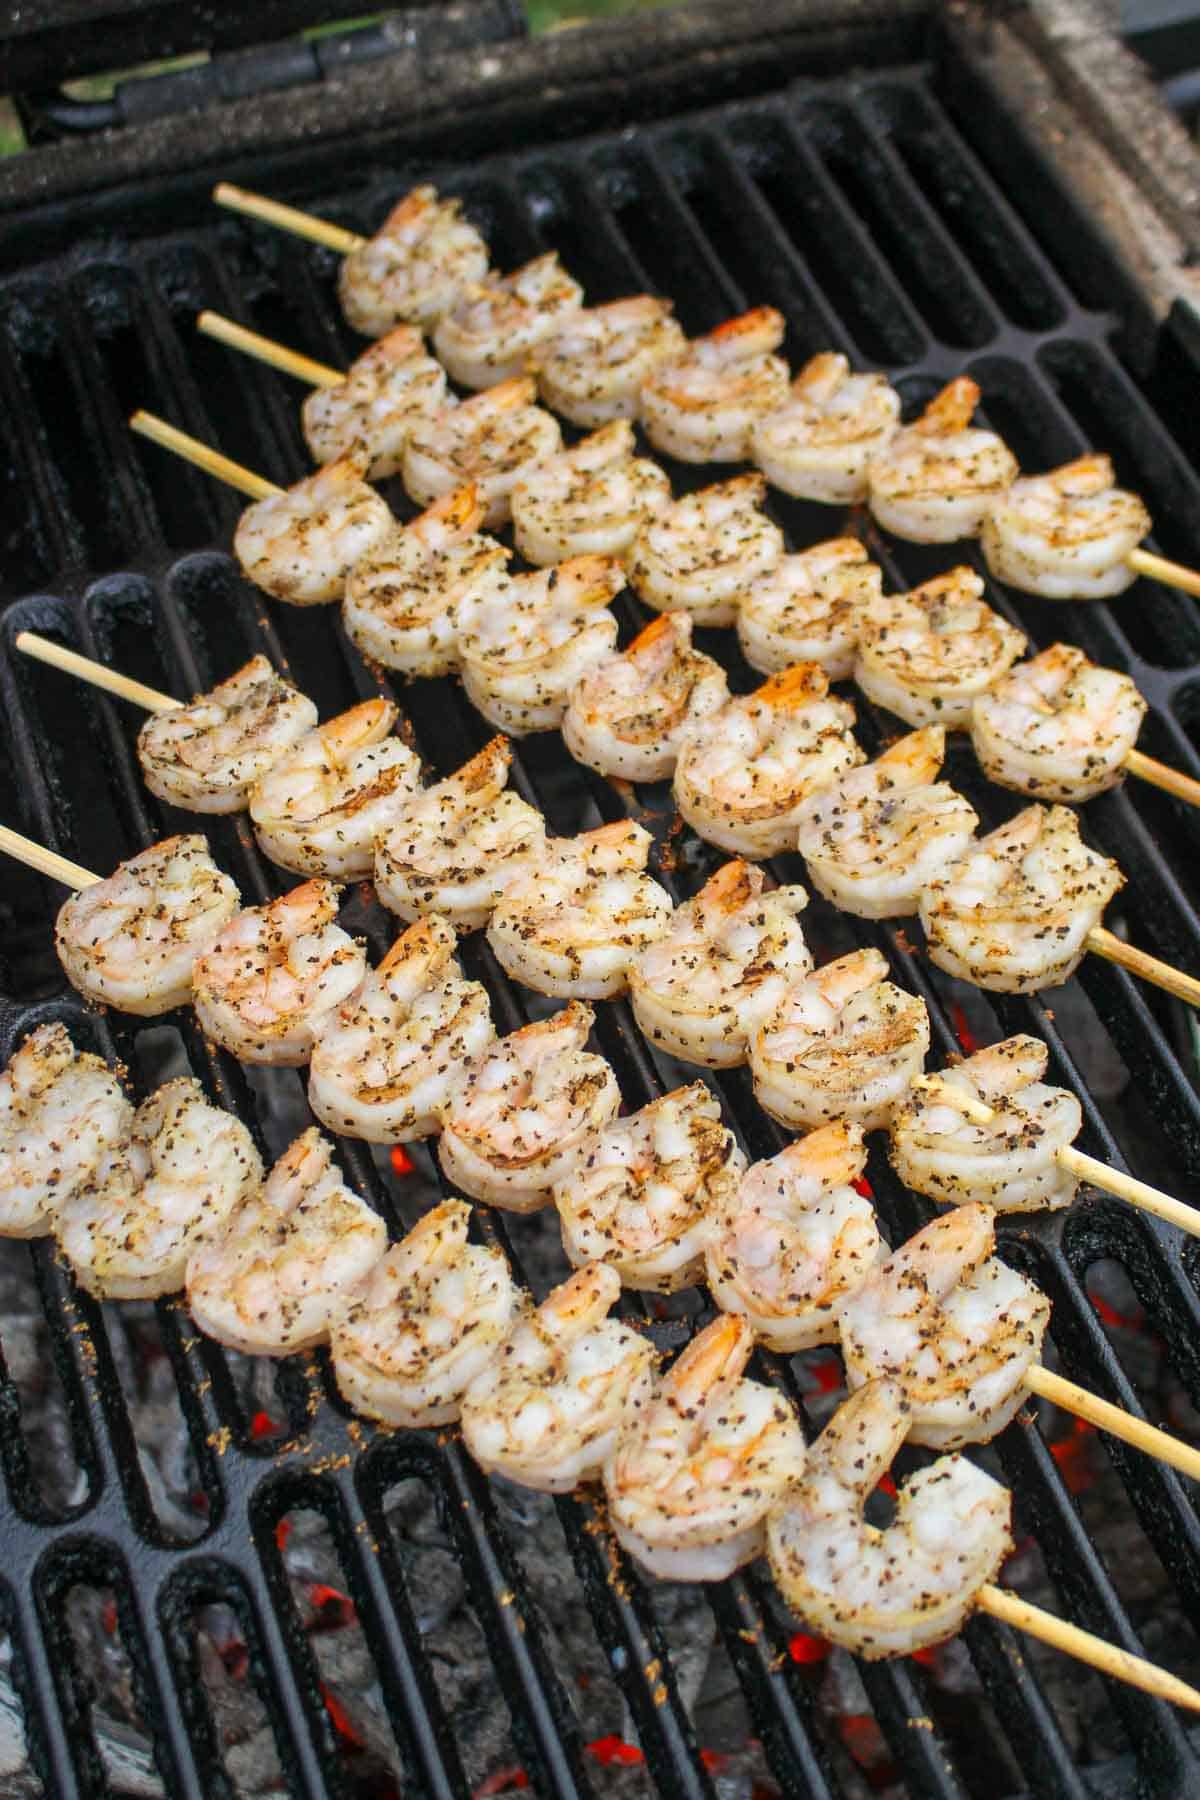 The shrimp grilling over the fire.